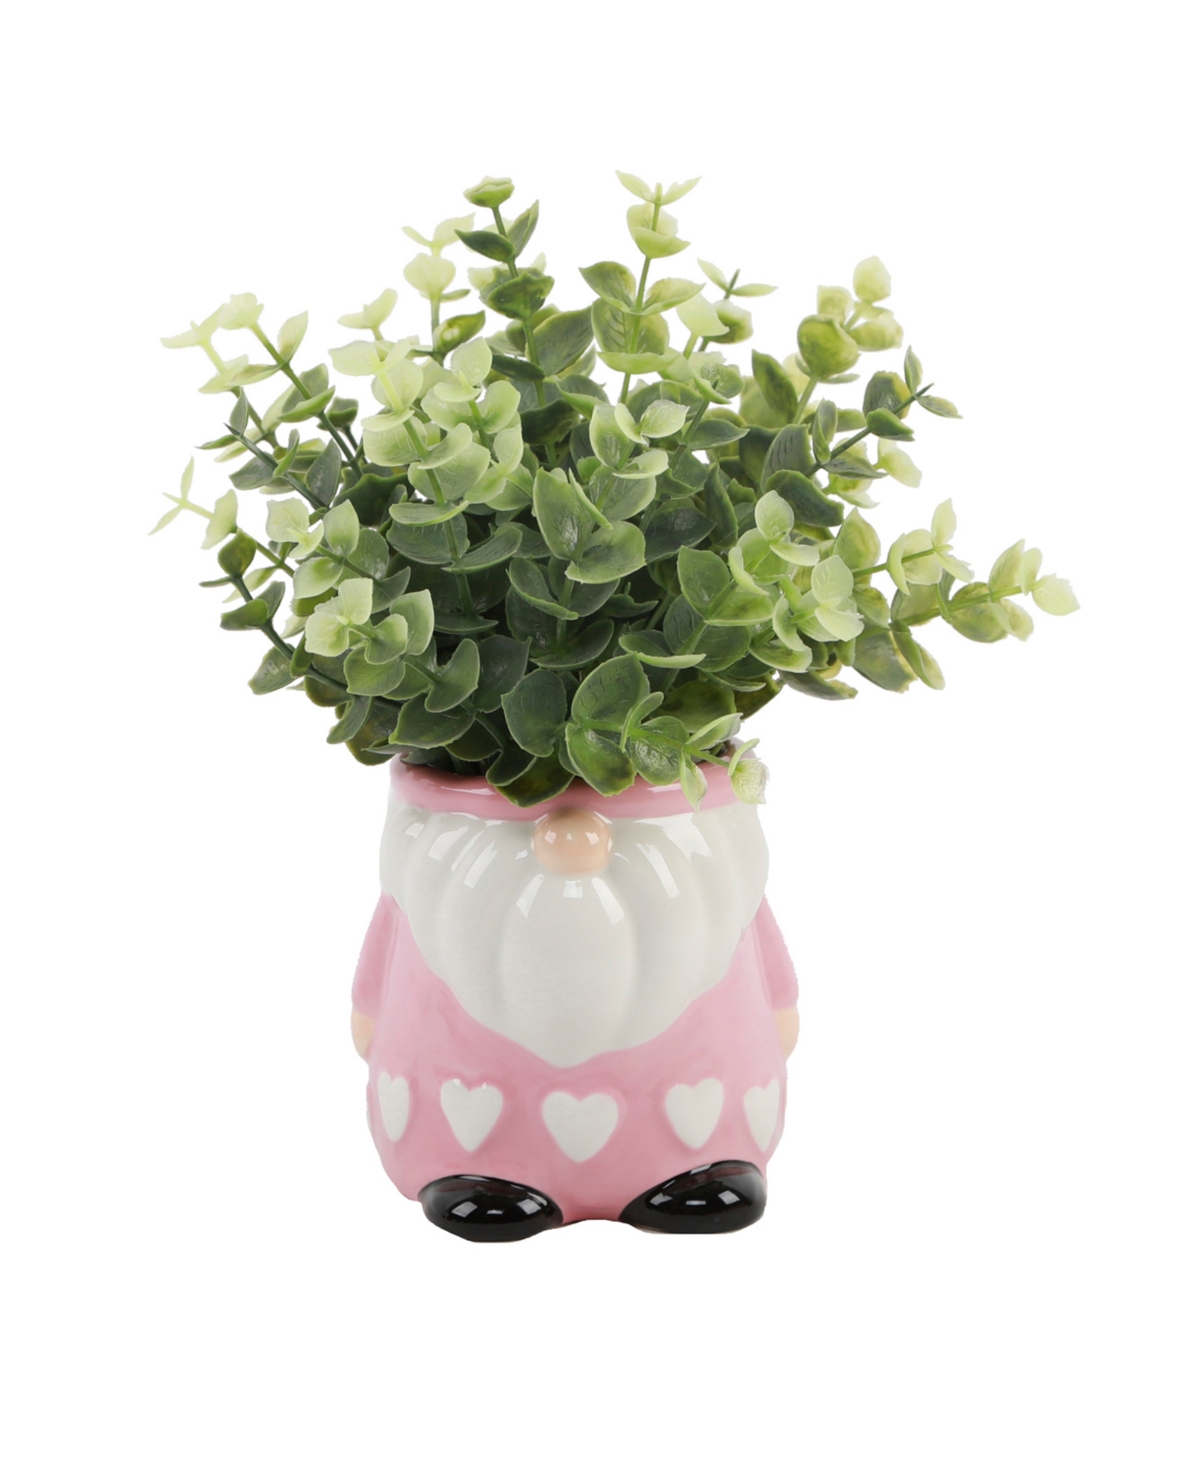 Eucalyptus in Hearts Gnome, 9" - Pink, Green